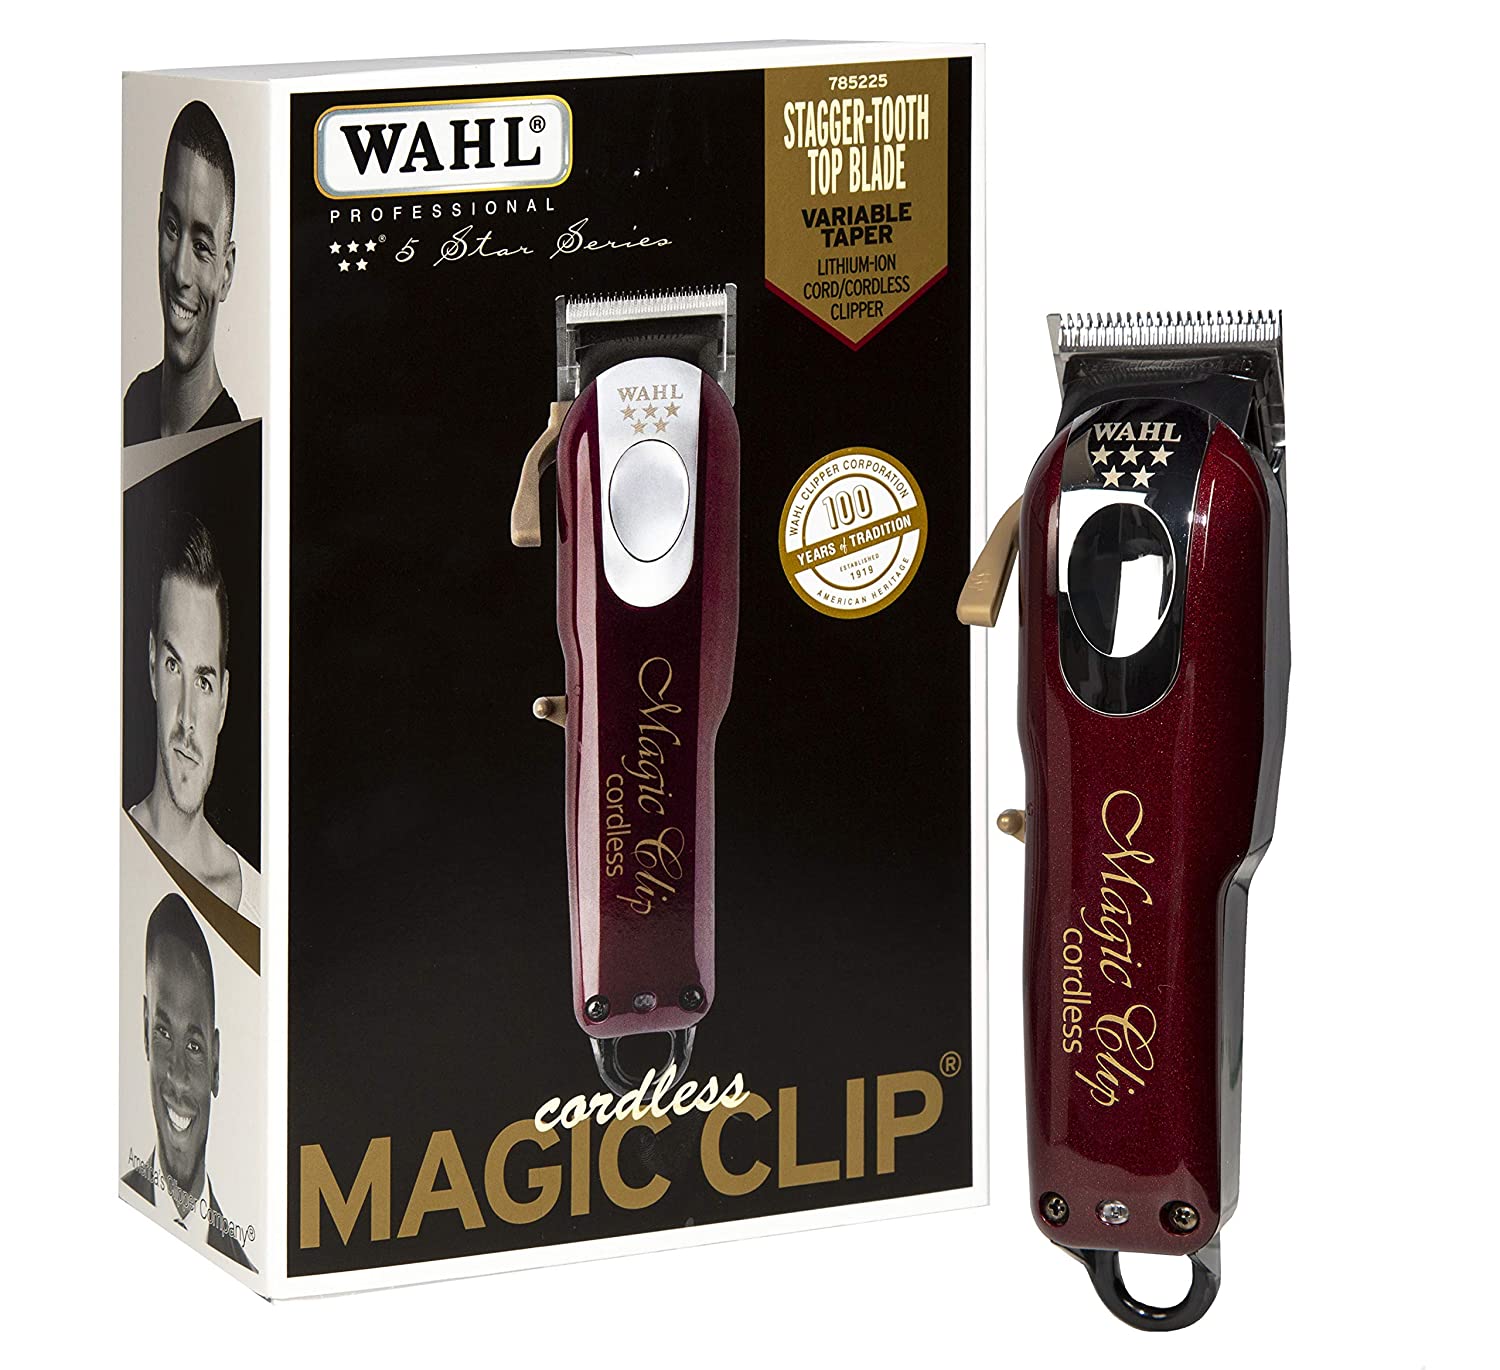 Wahl Professional 5 Star Magic Clip Cordless Trimmer